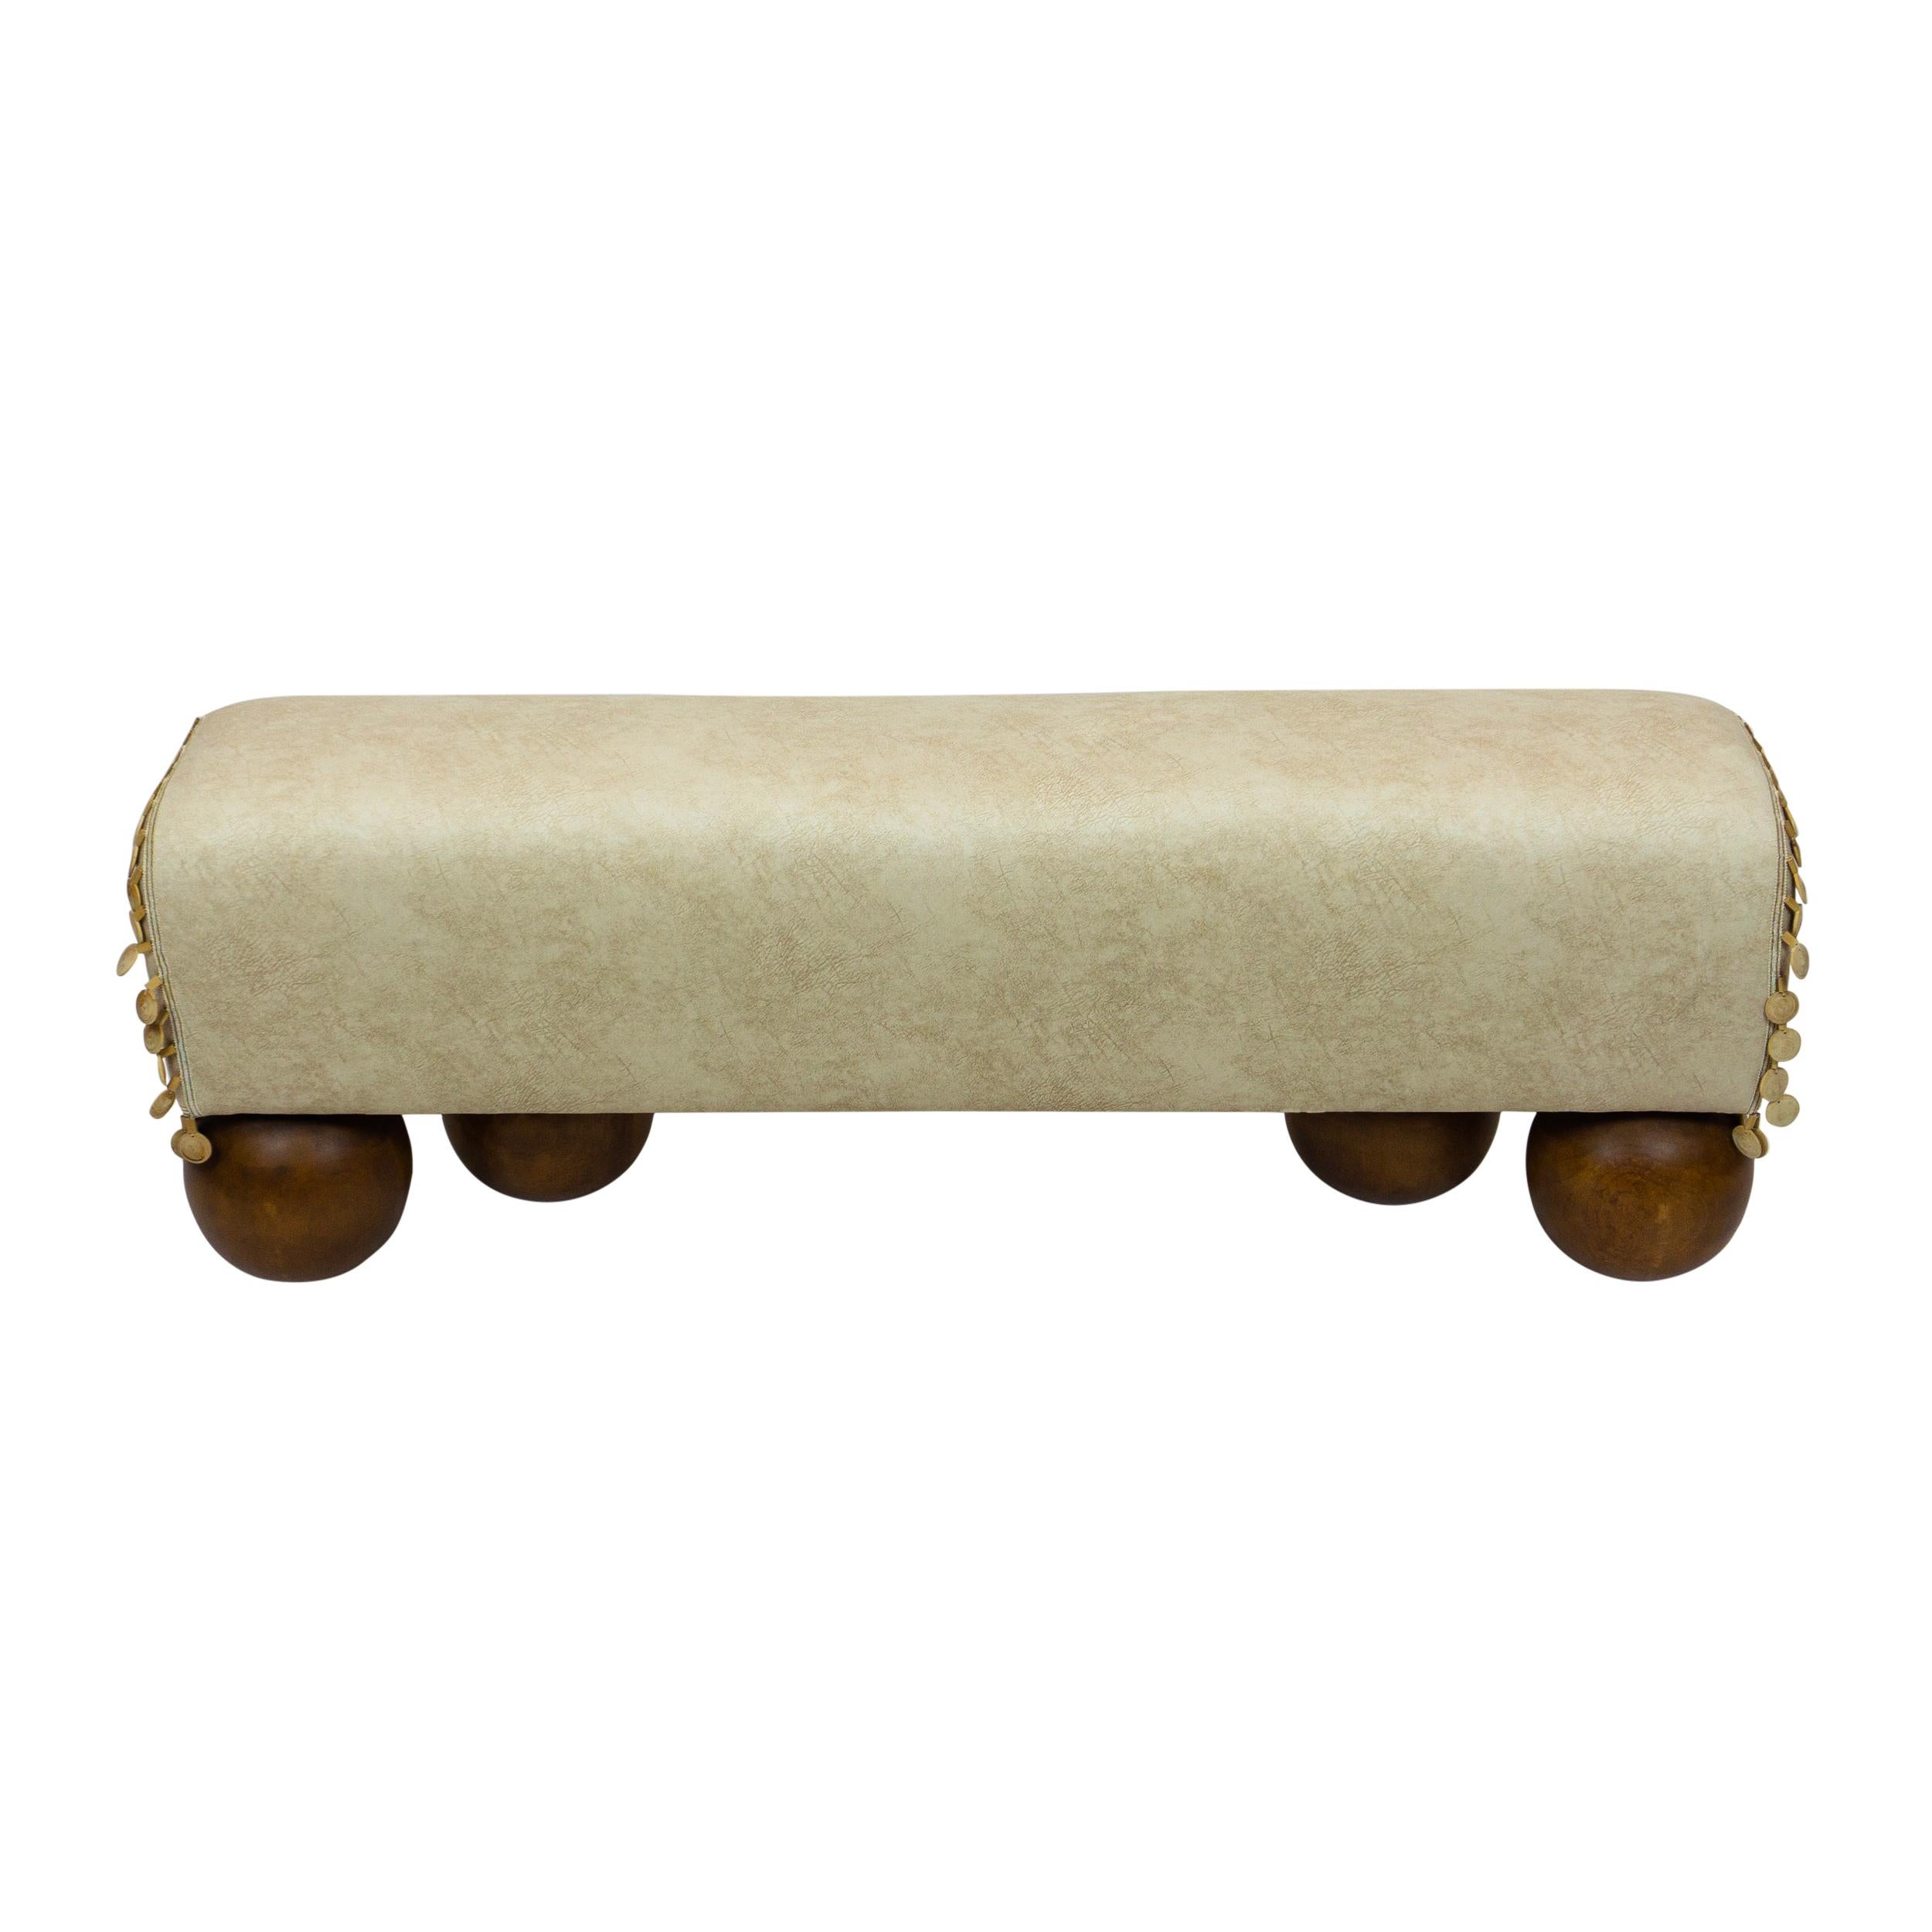 Velvet Walnut Ball Foot Bench with Saddle Shaped Seat - Customizable For Sale